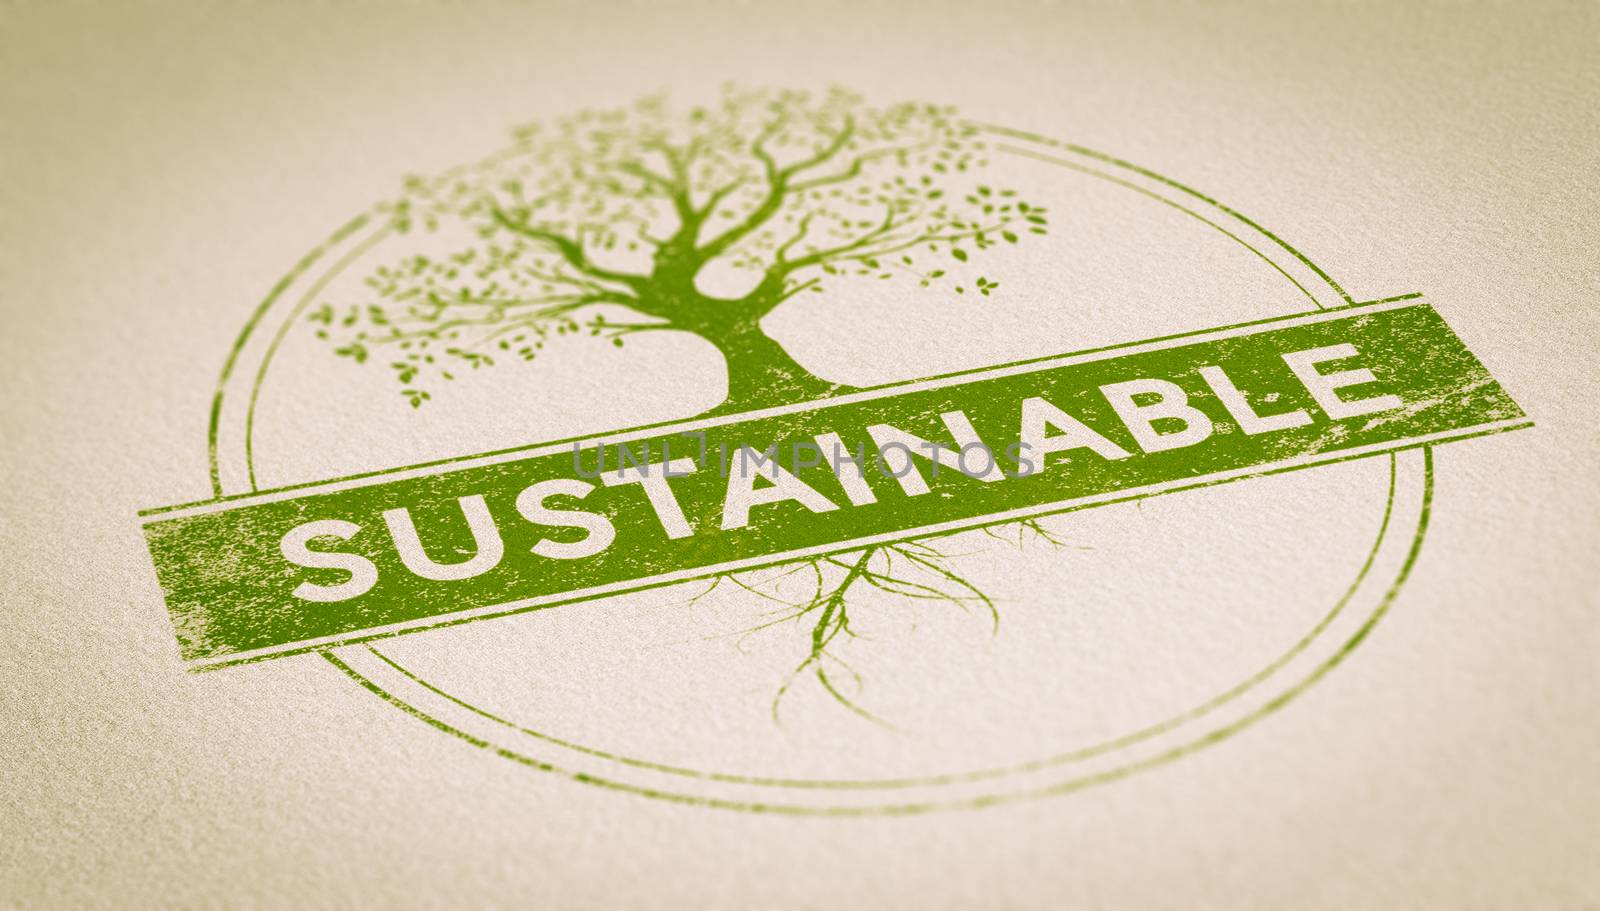 Sustainable by Olivier-Le-Moal